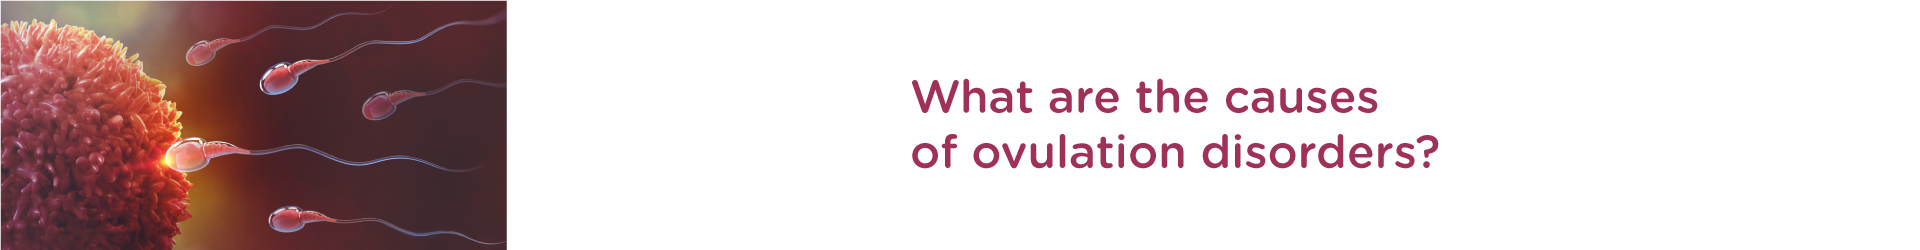 What are the causes of ovulation disorders?